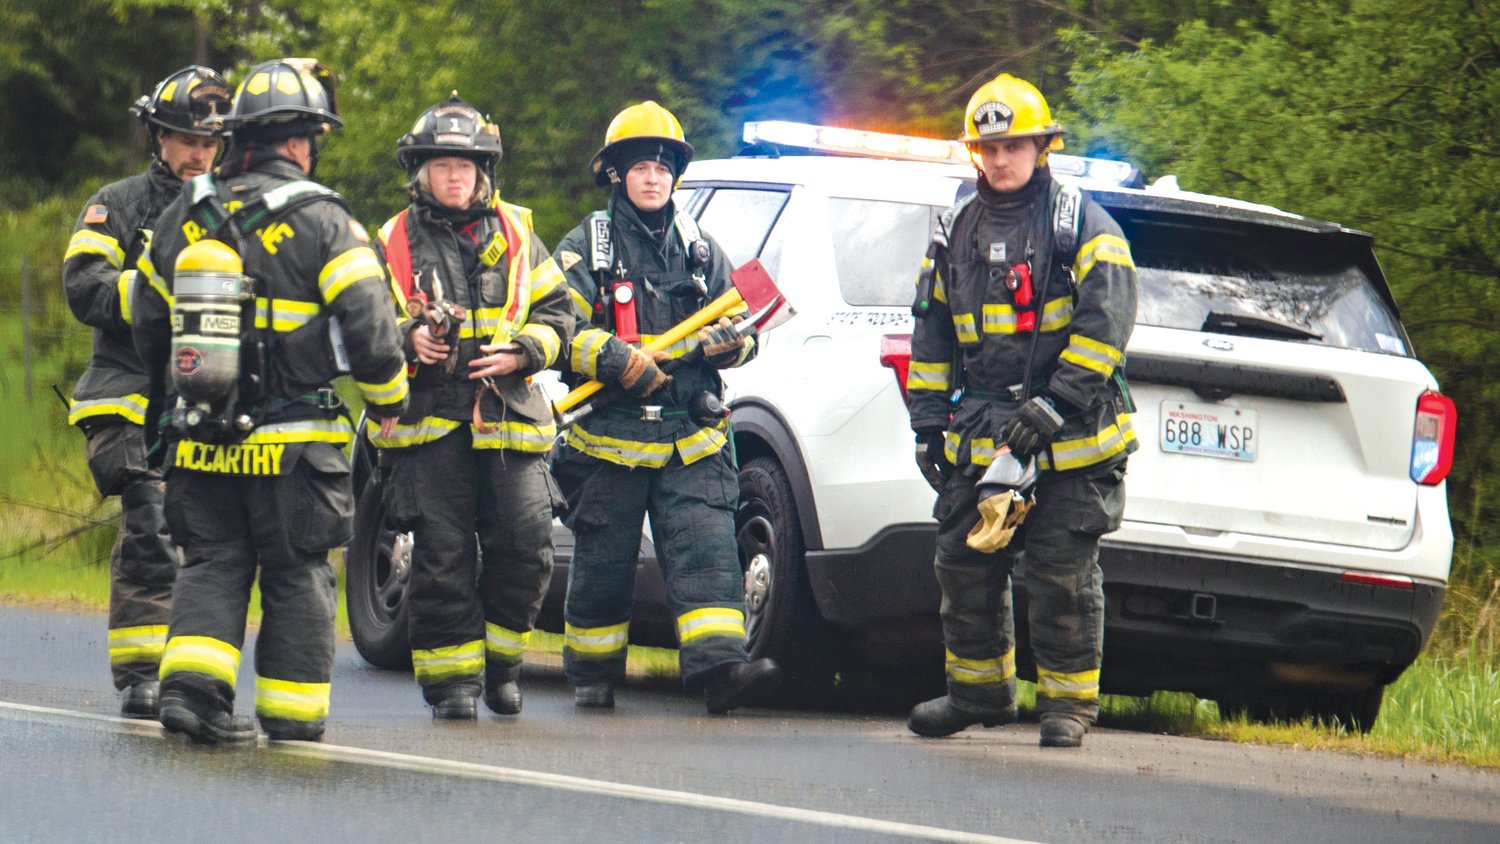 Firefighters from Riverside Fire Authority carry axes and other equipment down the shoulder of Interstate 5 southbound near milepost 86 Tuesday afternoon following a car fire in Grand Mound.